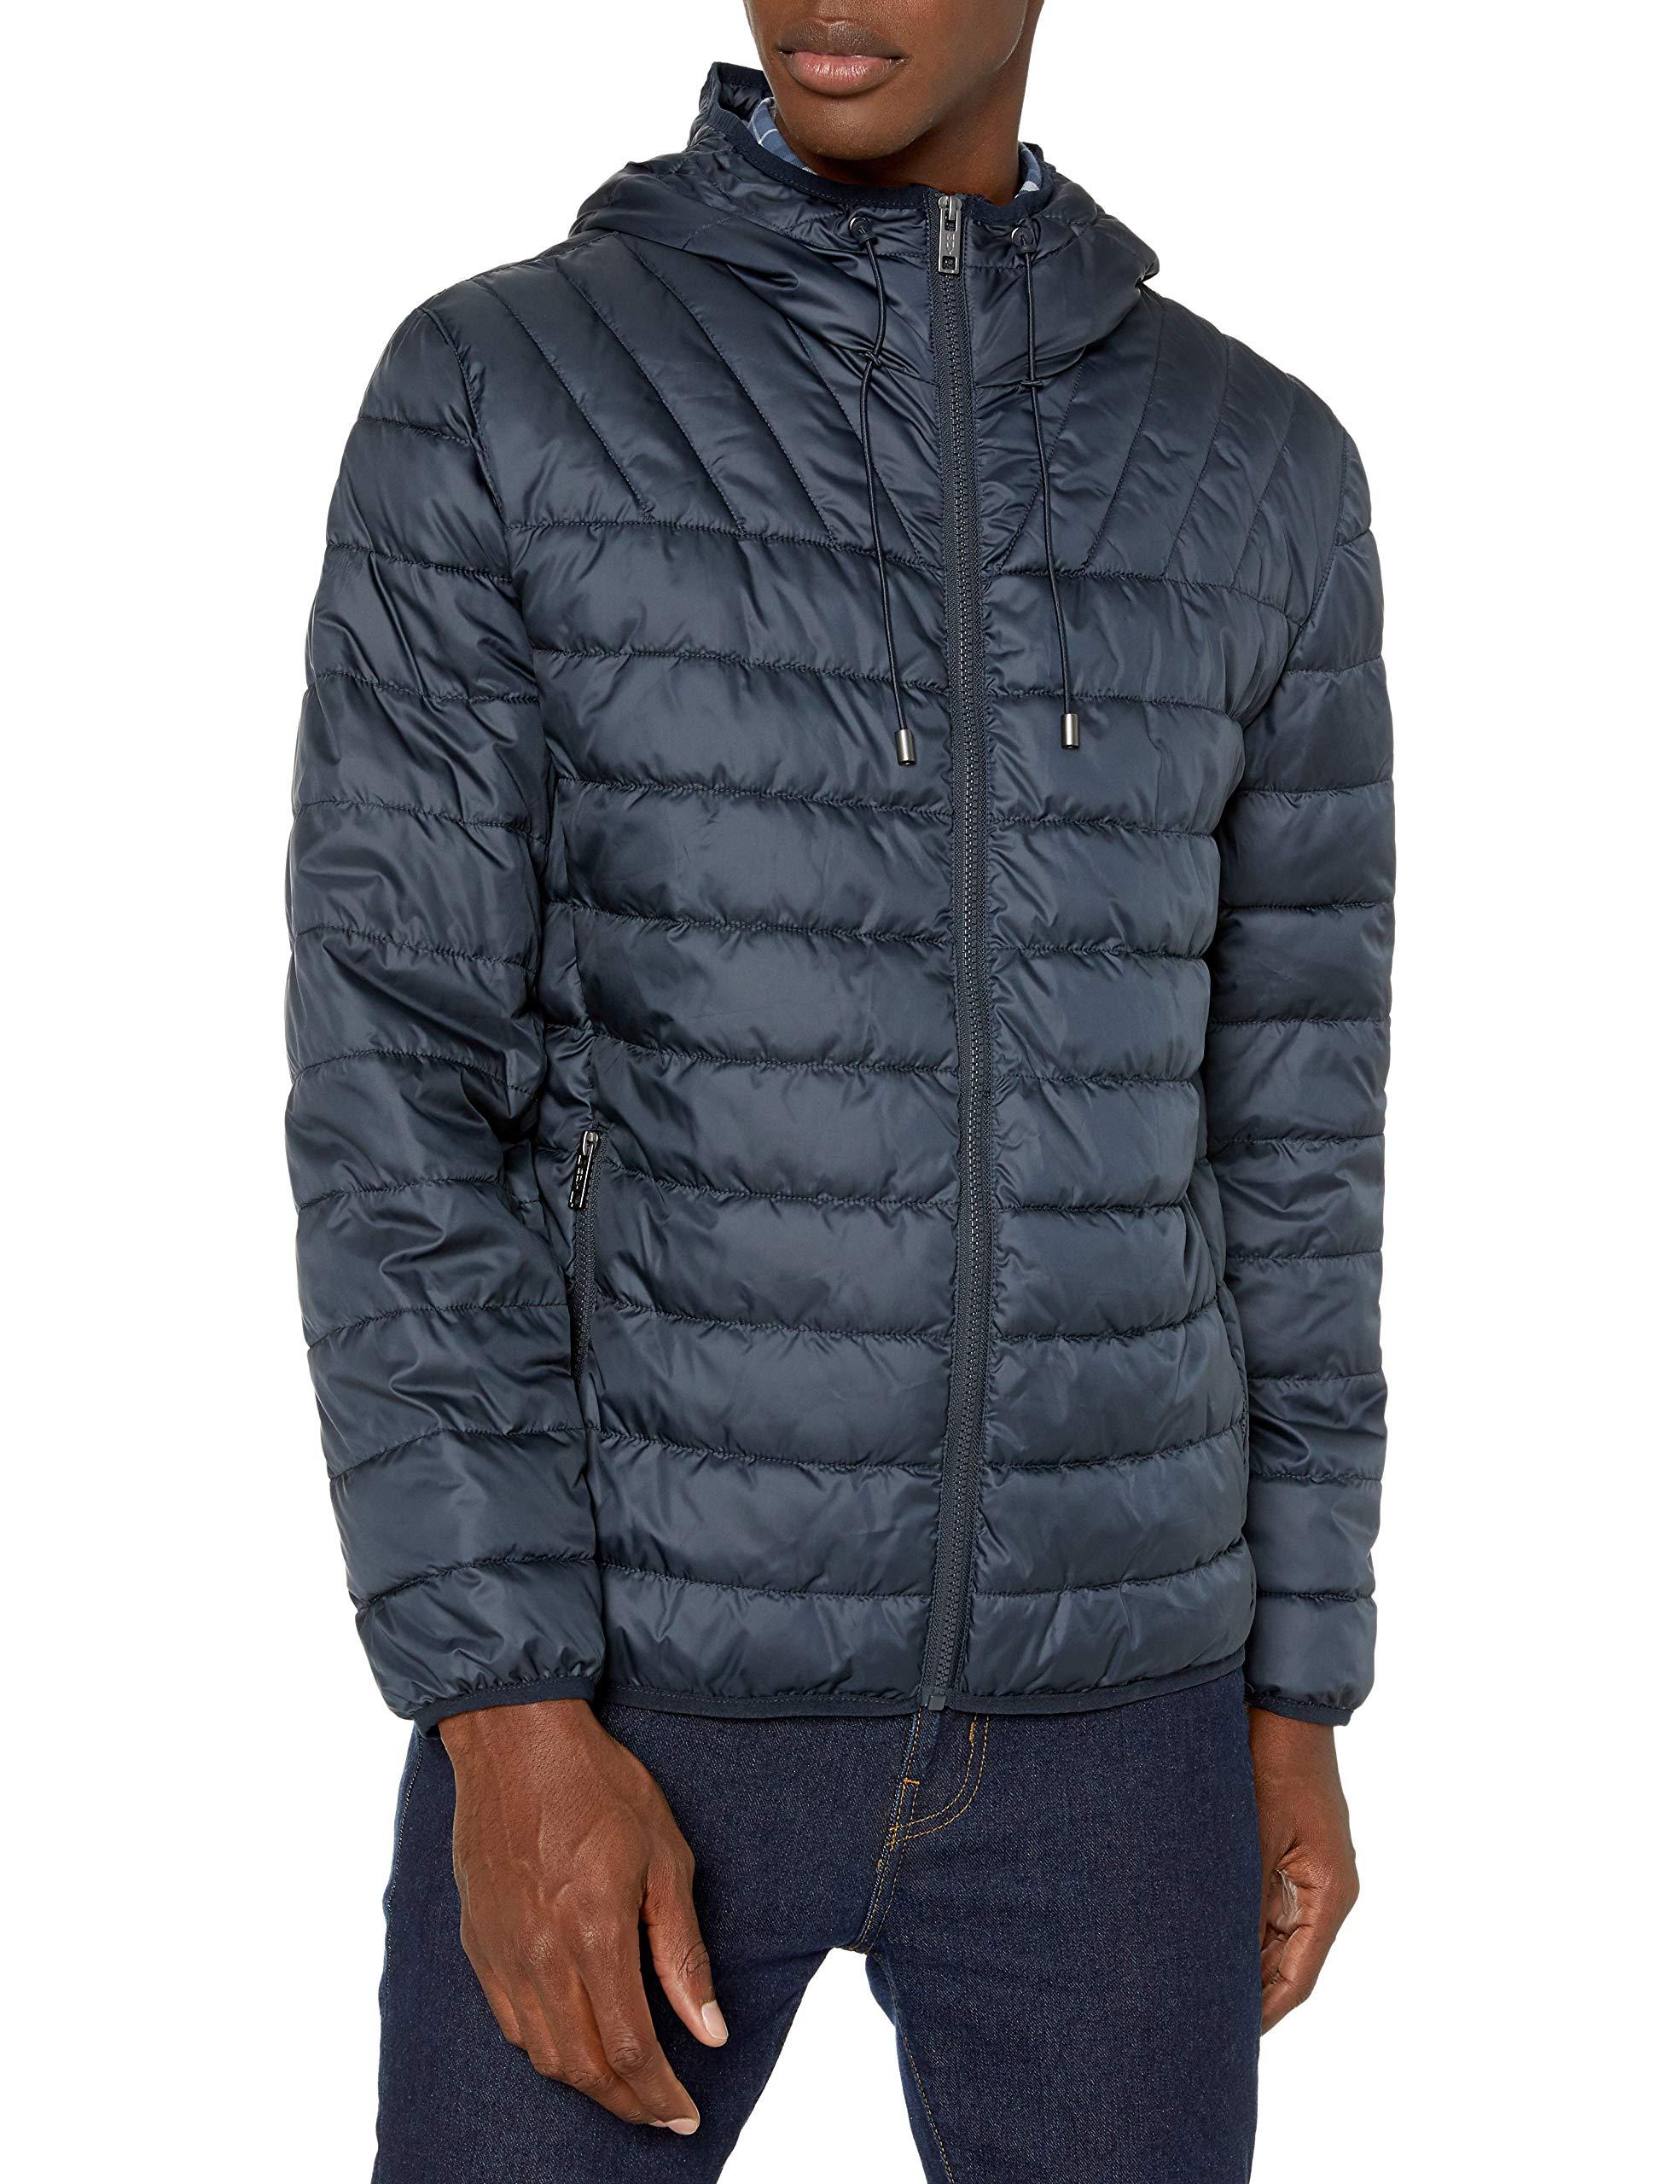 Marc New York Synthetic Dunmore Hooded Puffer Jacket in Blue for Men - Lyst